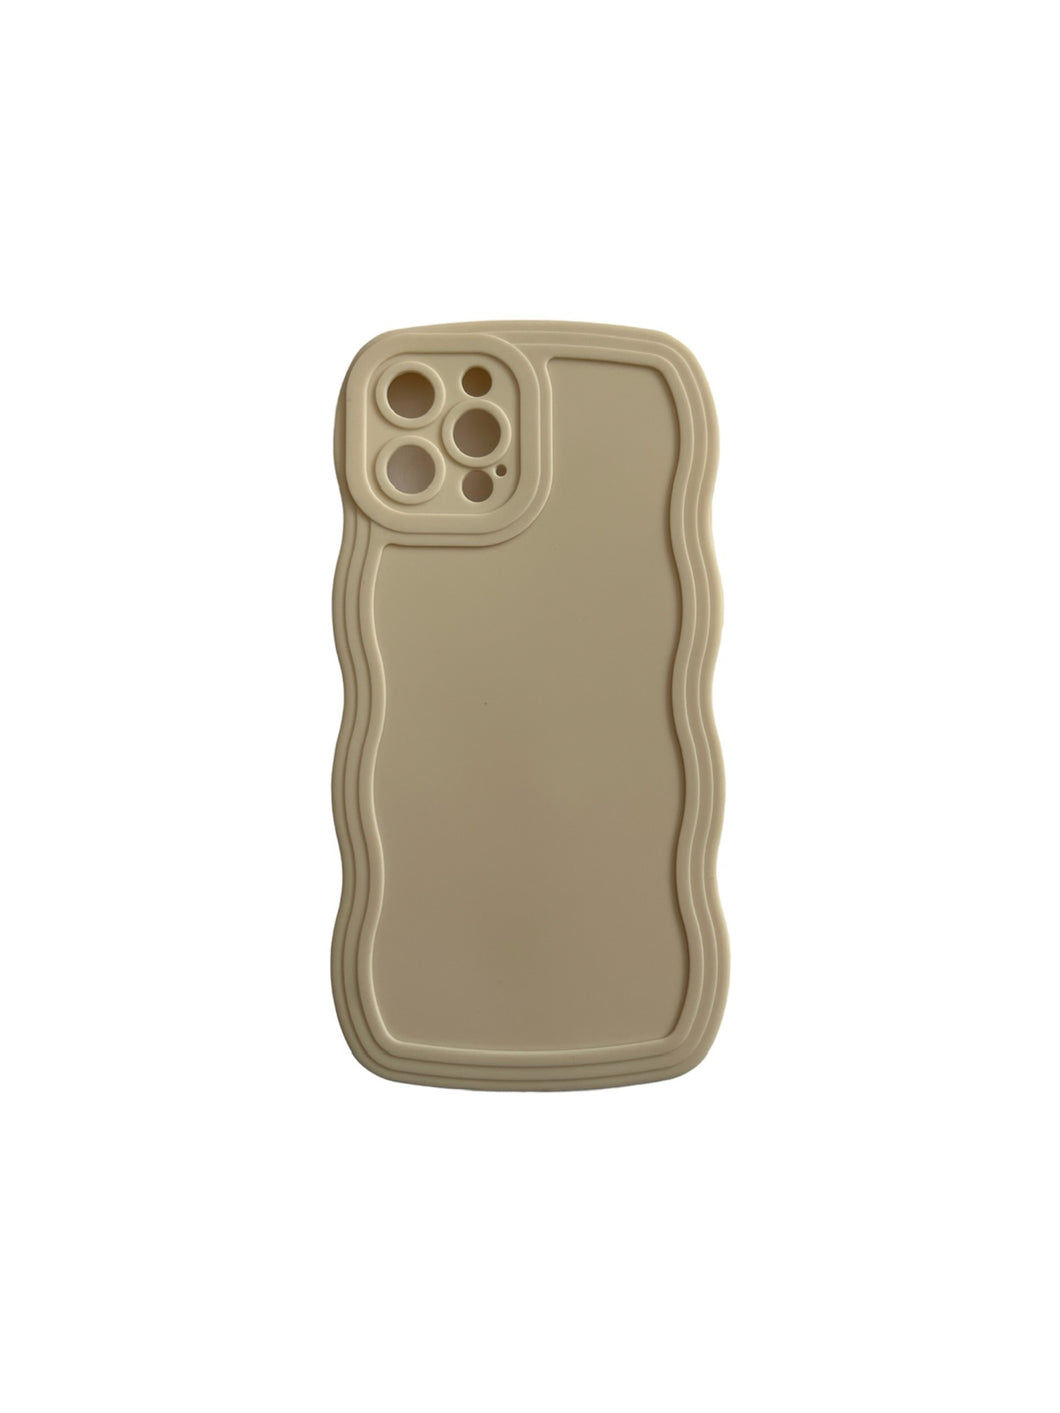 Bubbel IPhone Hoes Beige